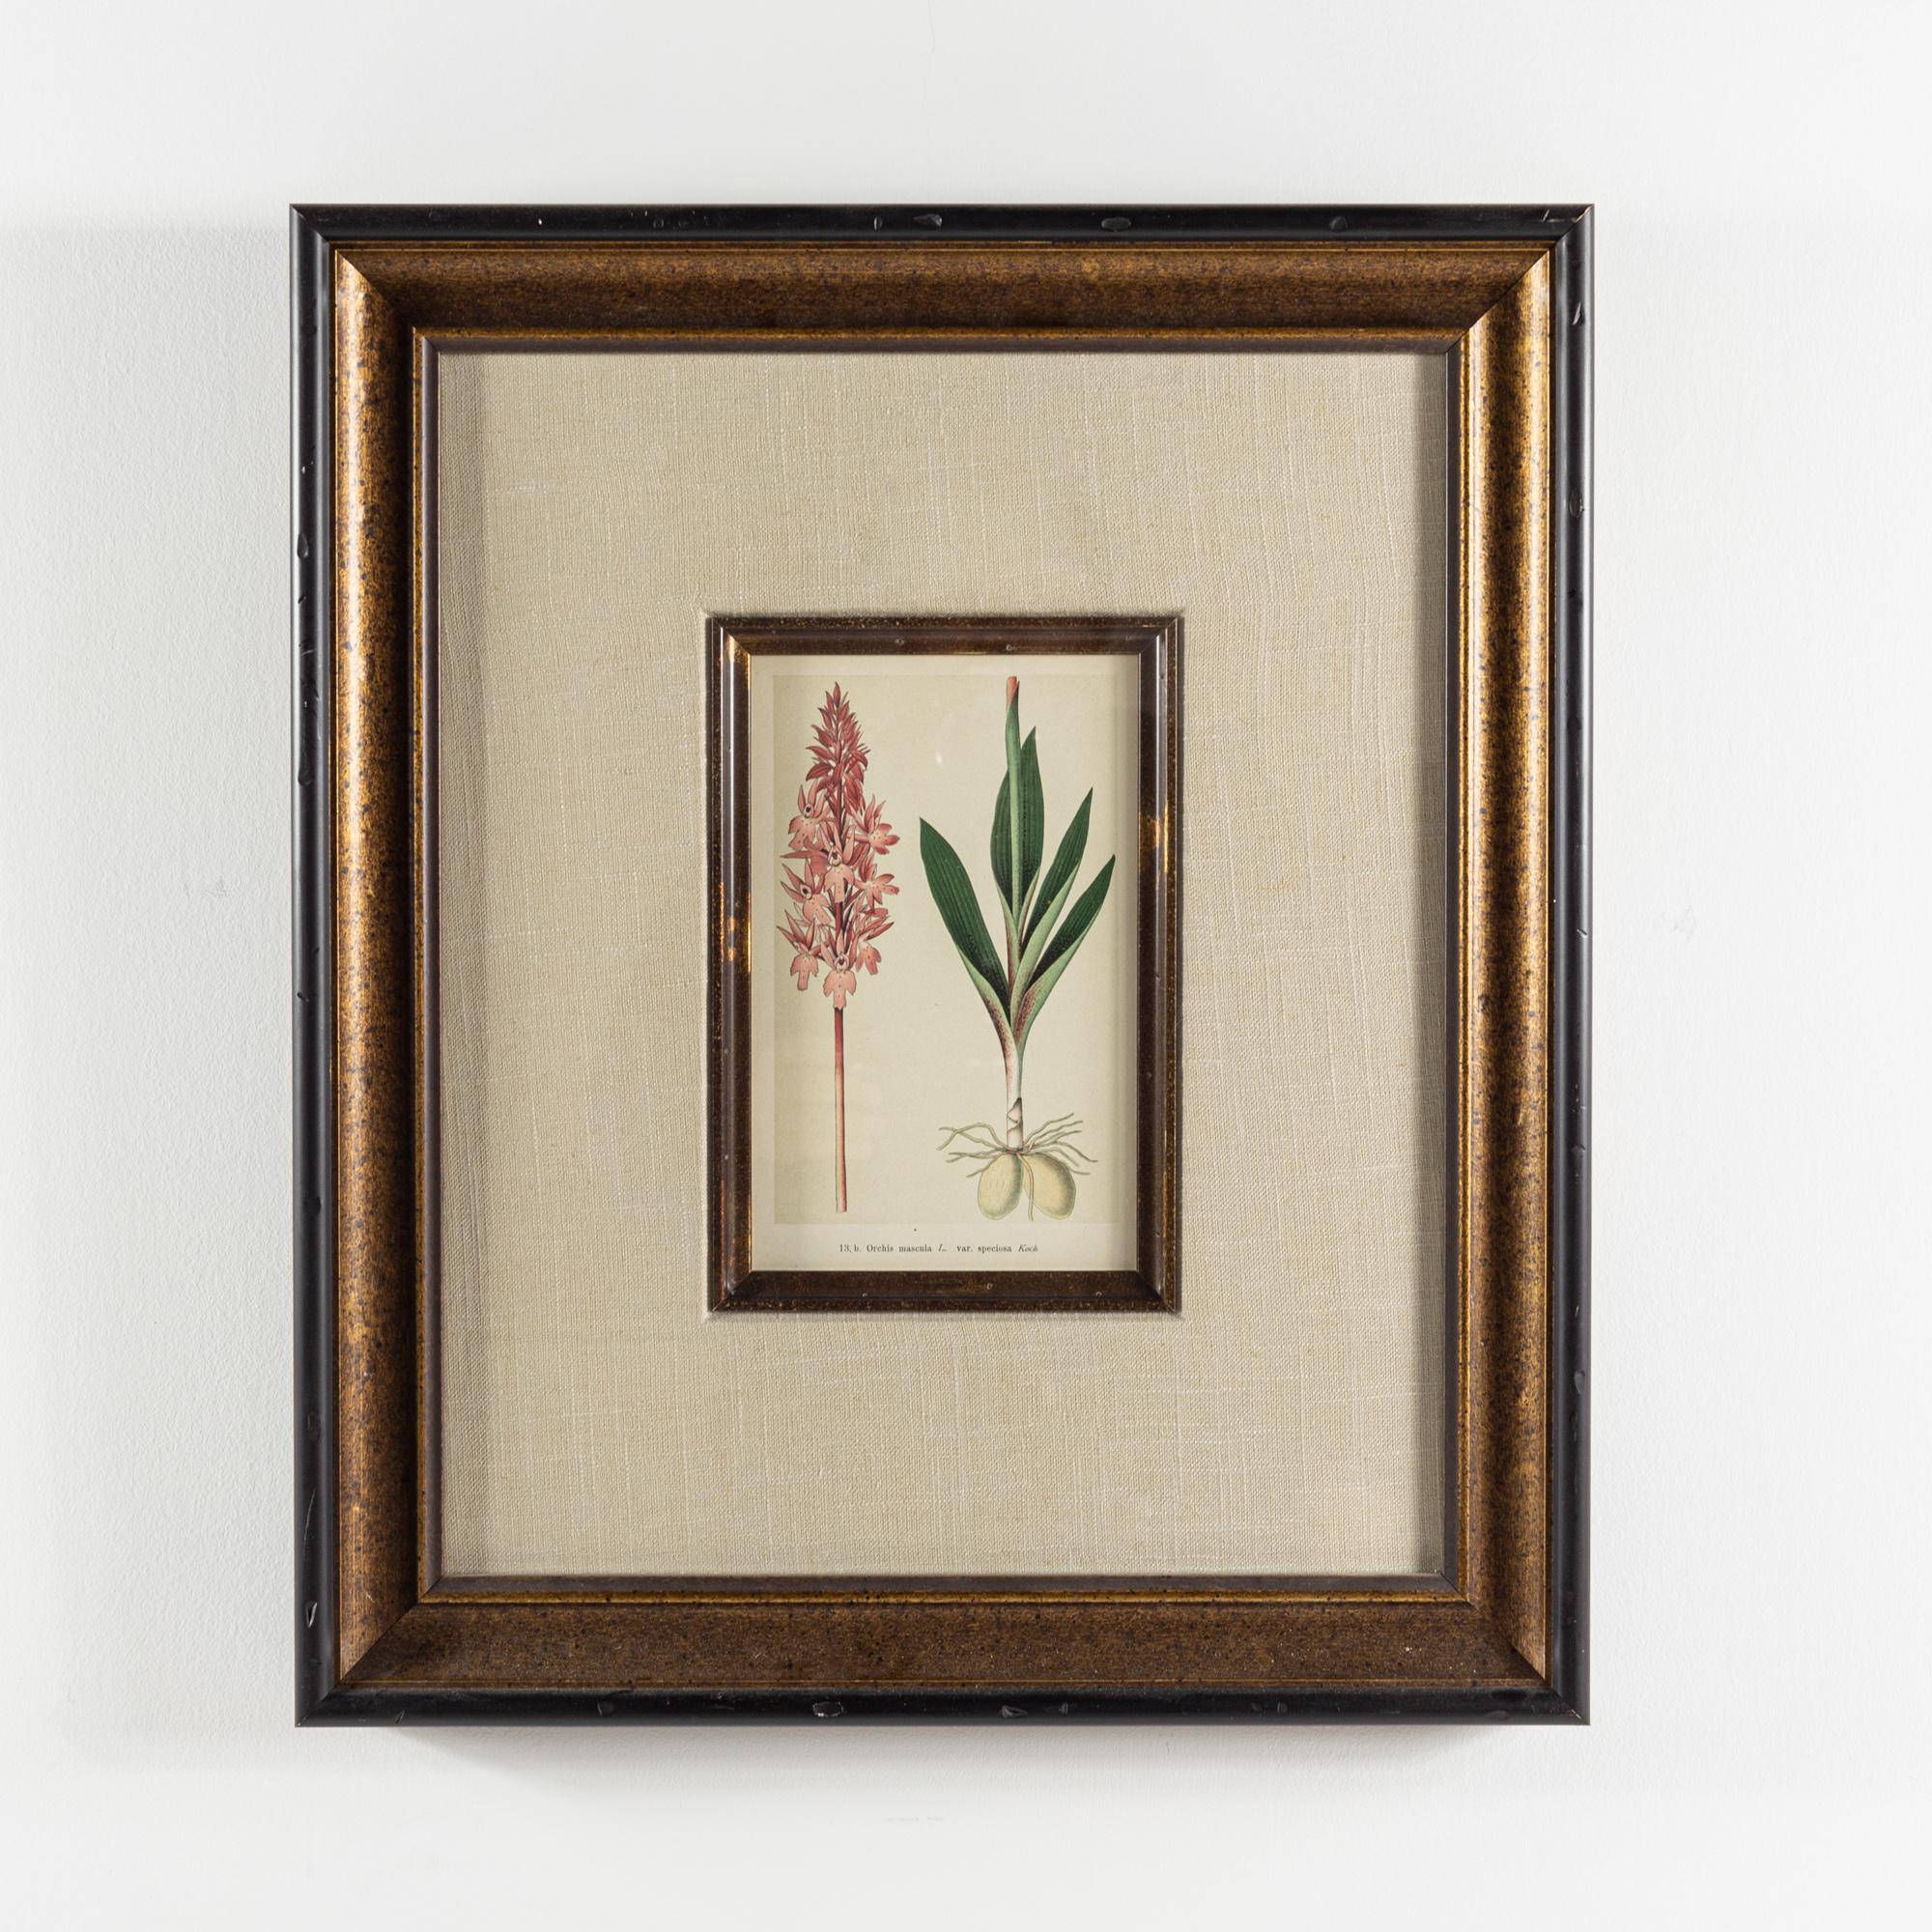 Orchis Mascula flower botanical framed print

This print measures: 19 wide x 1.5 deep x 22 inches high

This print is in Good Vintage Condition with minor marks, dents, and wear.

We take our photos in a controlled lighting studio to show as